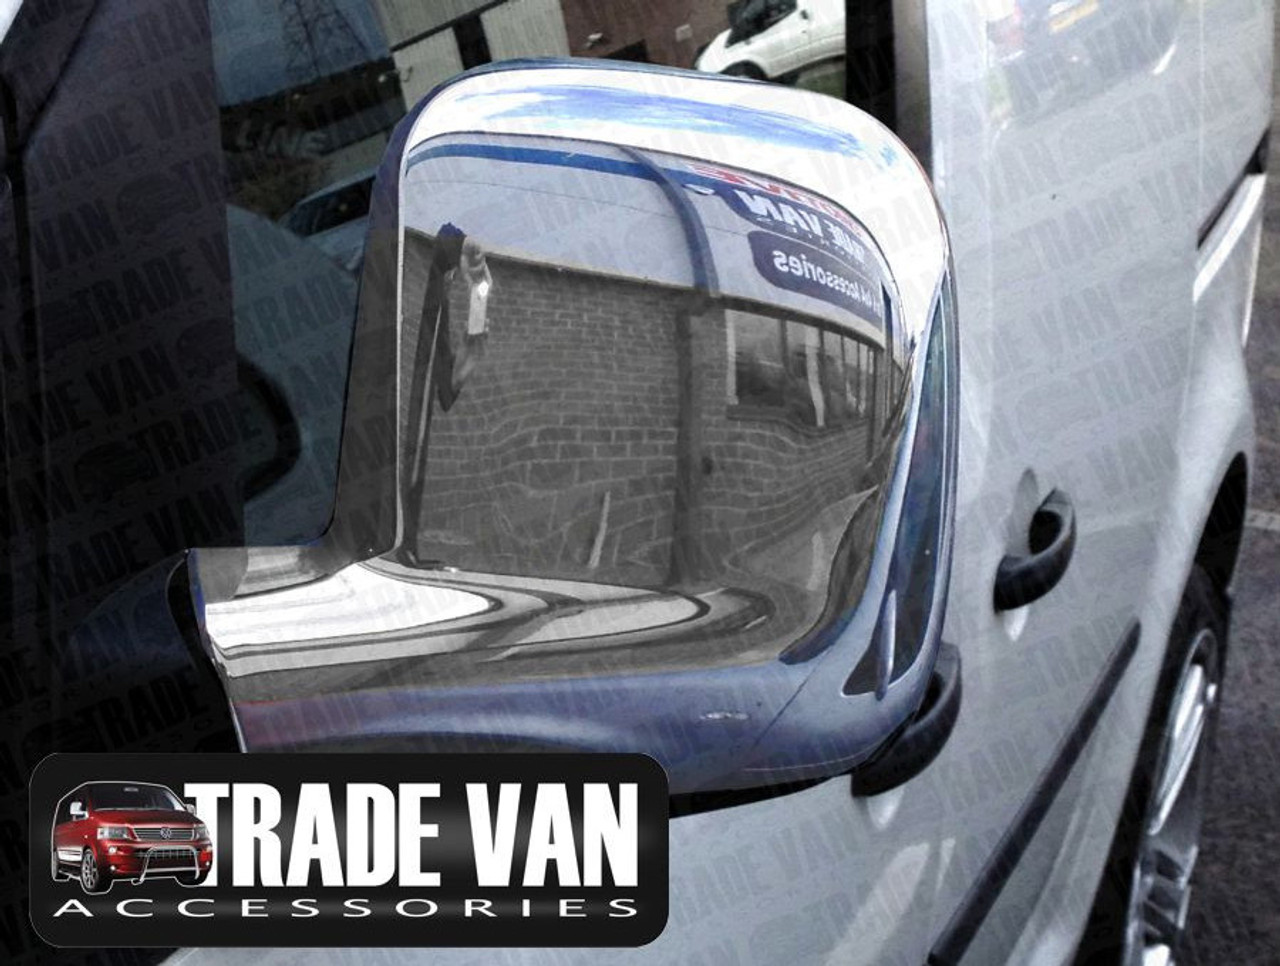 VW Caddy Mirror Covers ABS Chrome, Caddy Side Styling Accessories